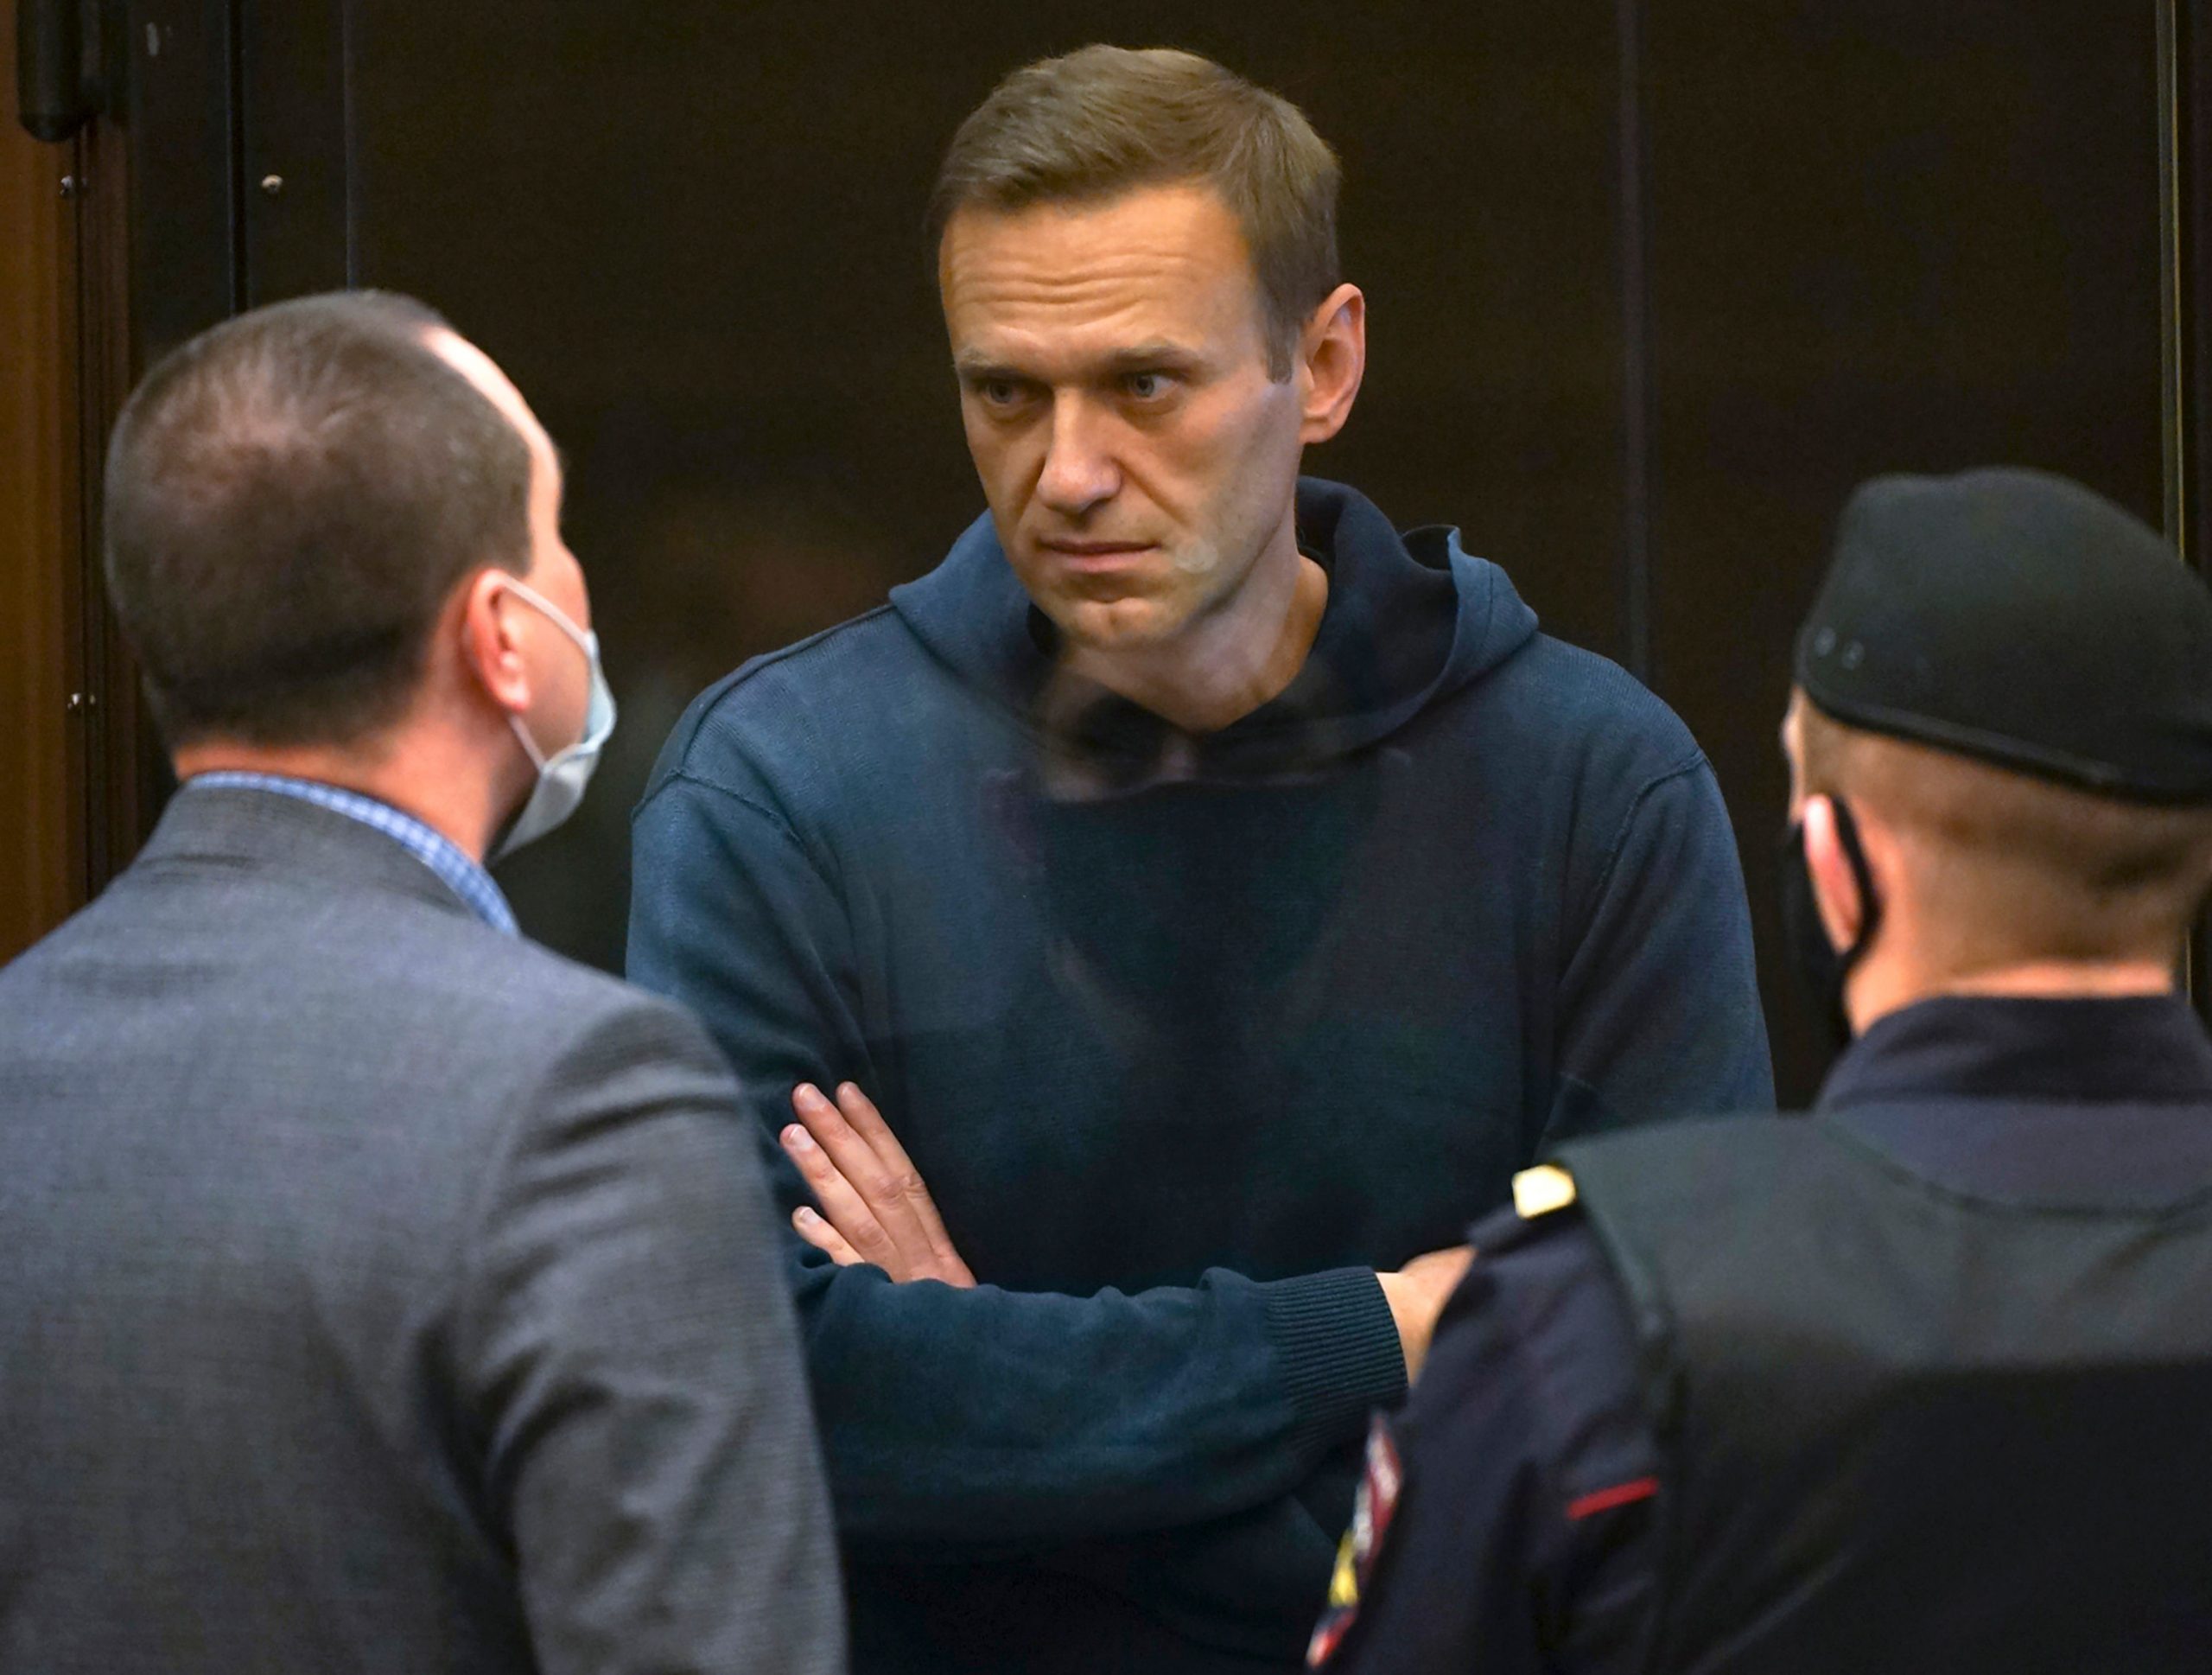 Kremlin critic Alexei Navalny charged with fraud, contempt of court